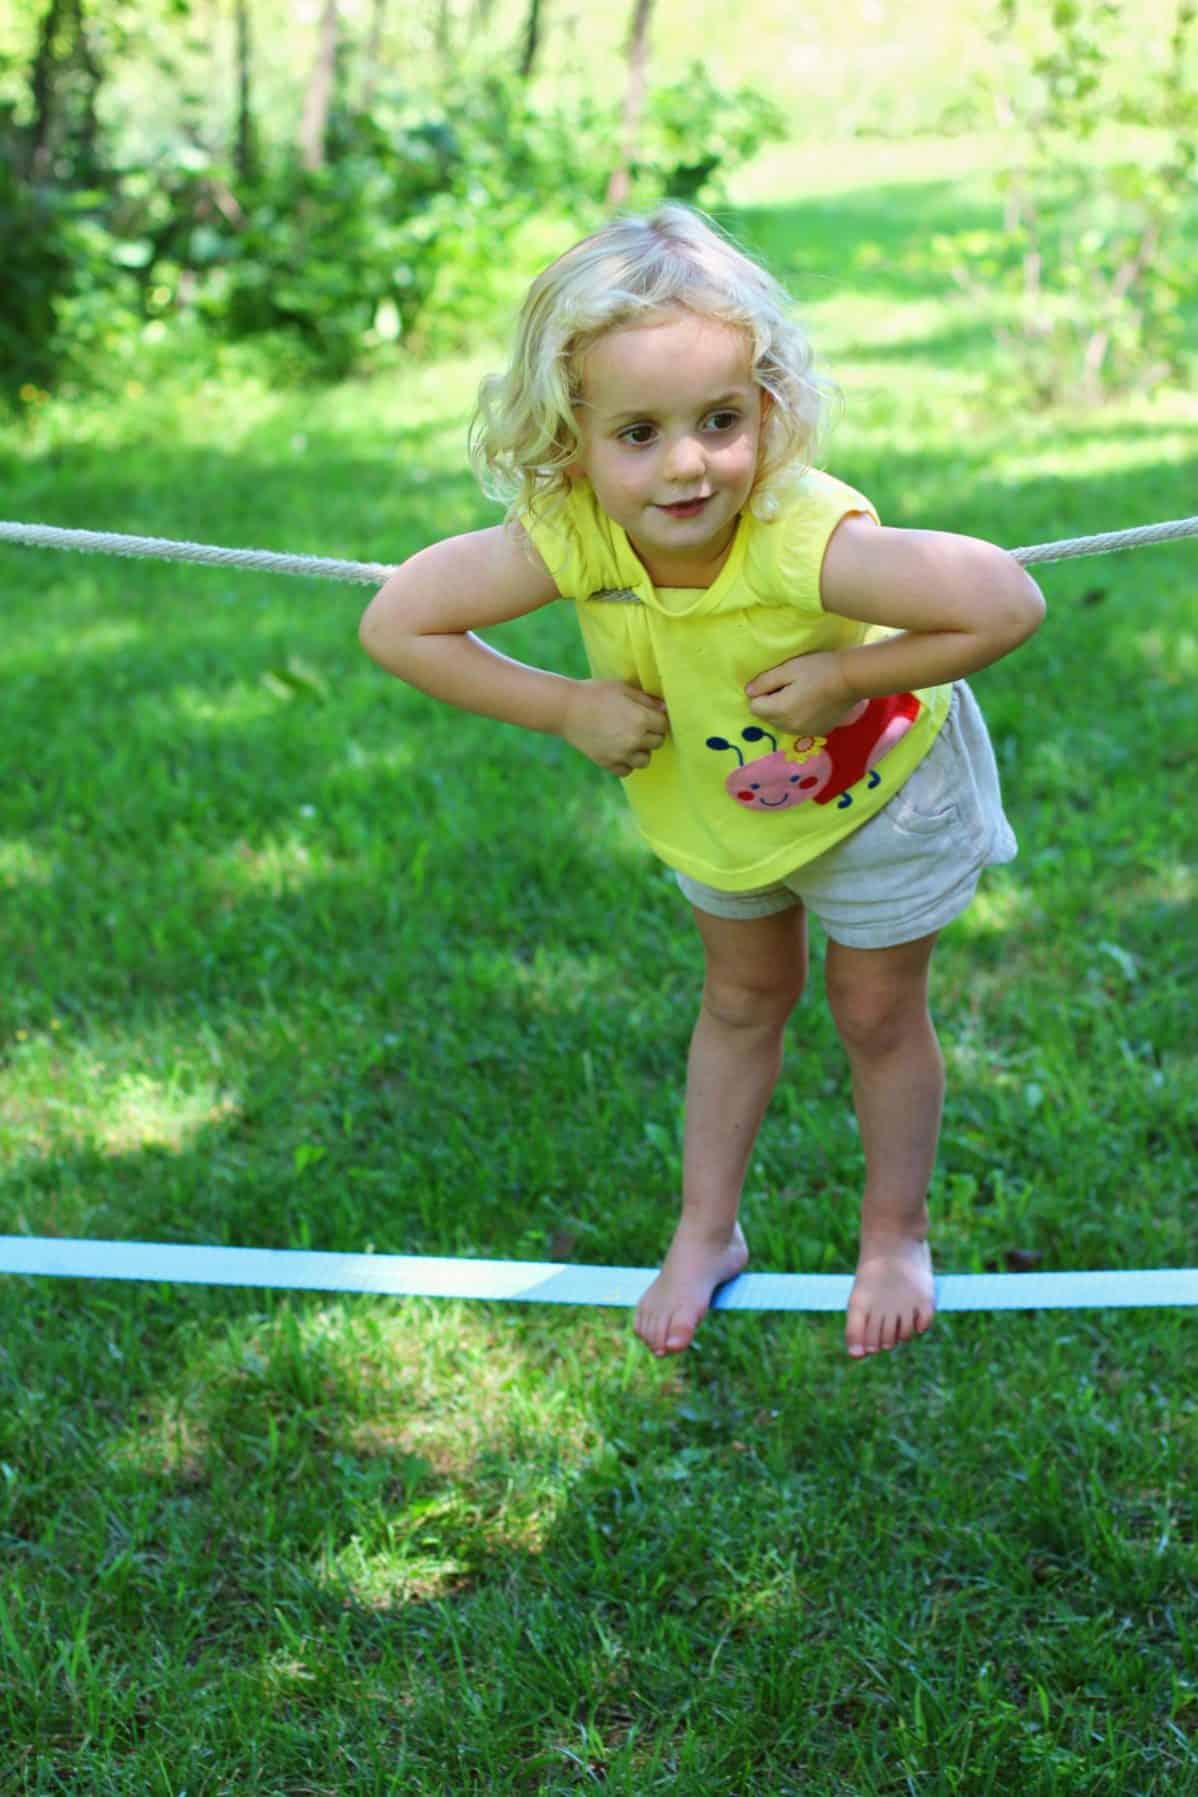 A Beginner's Guide to Backyard Slacklining with Kids